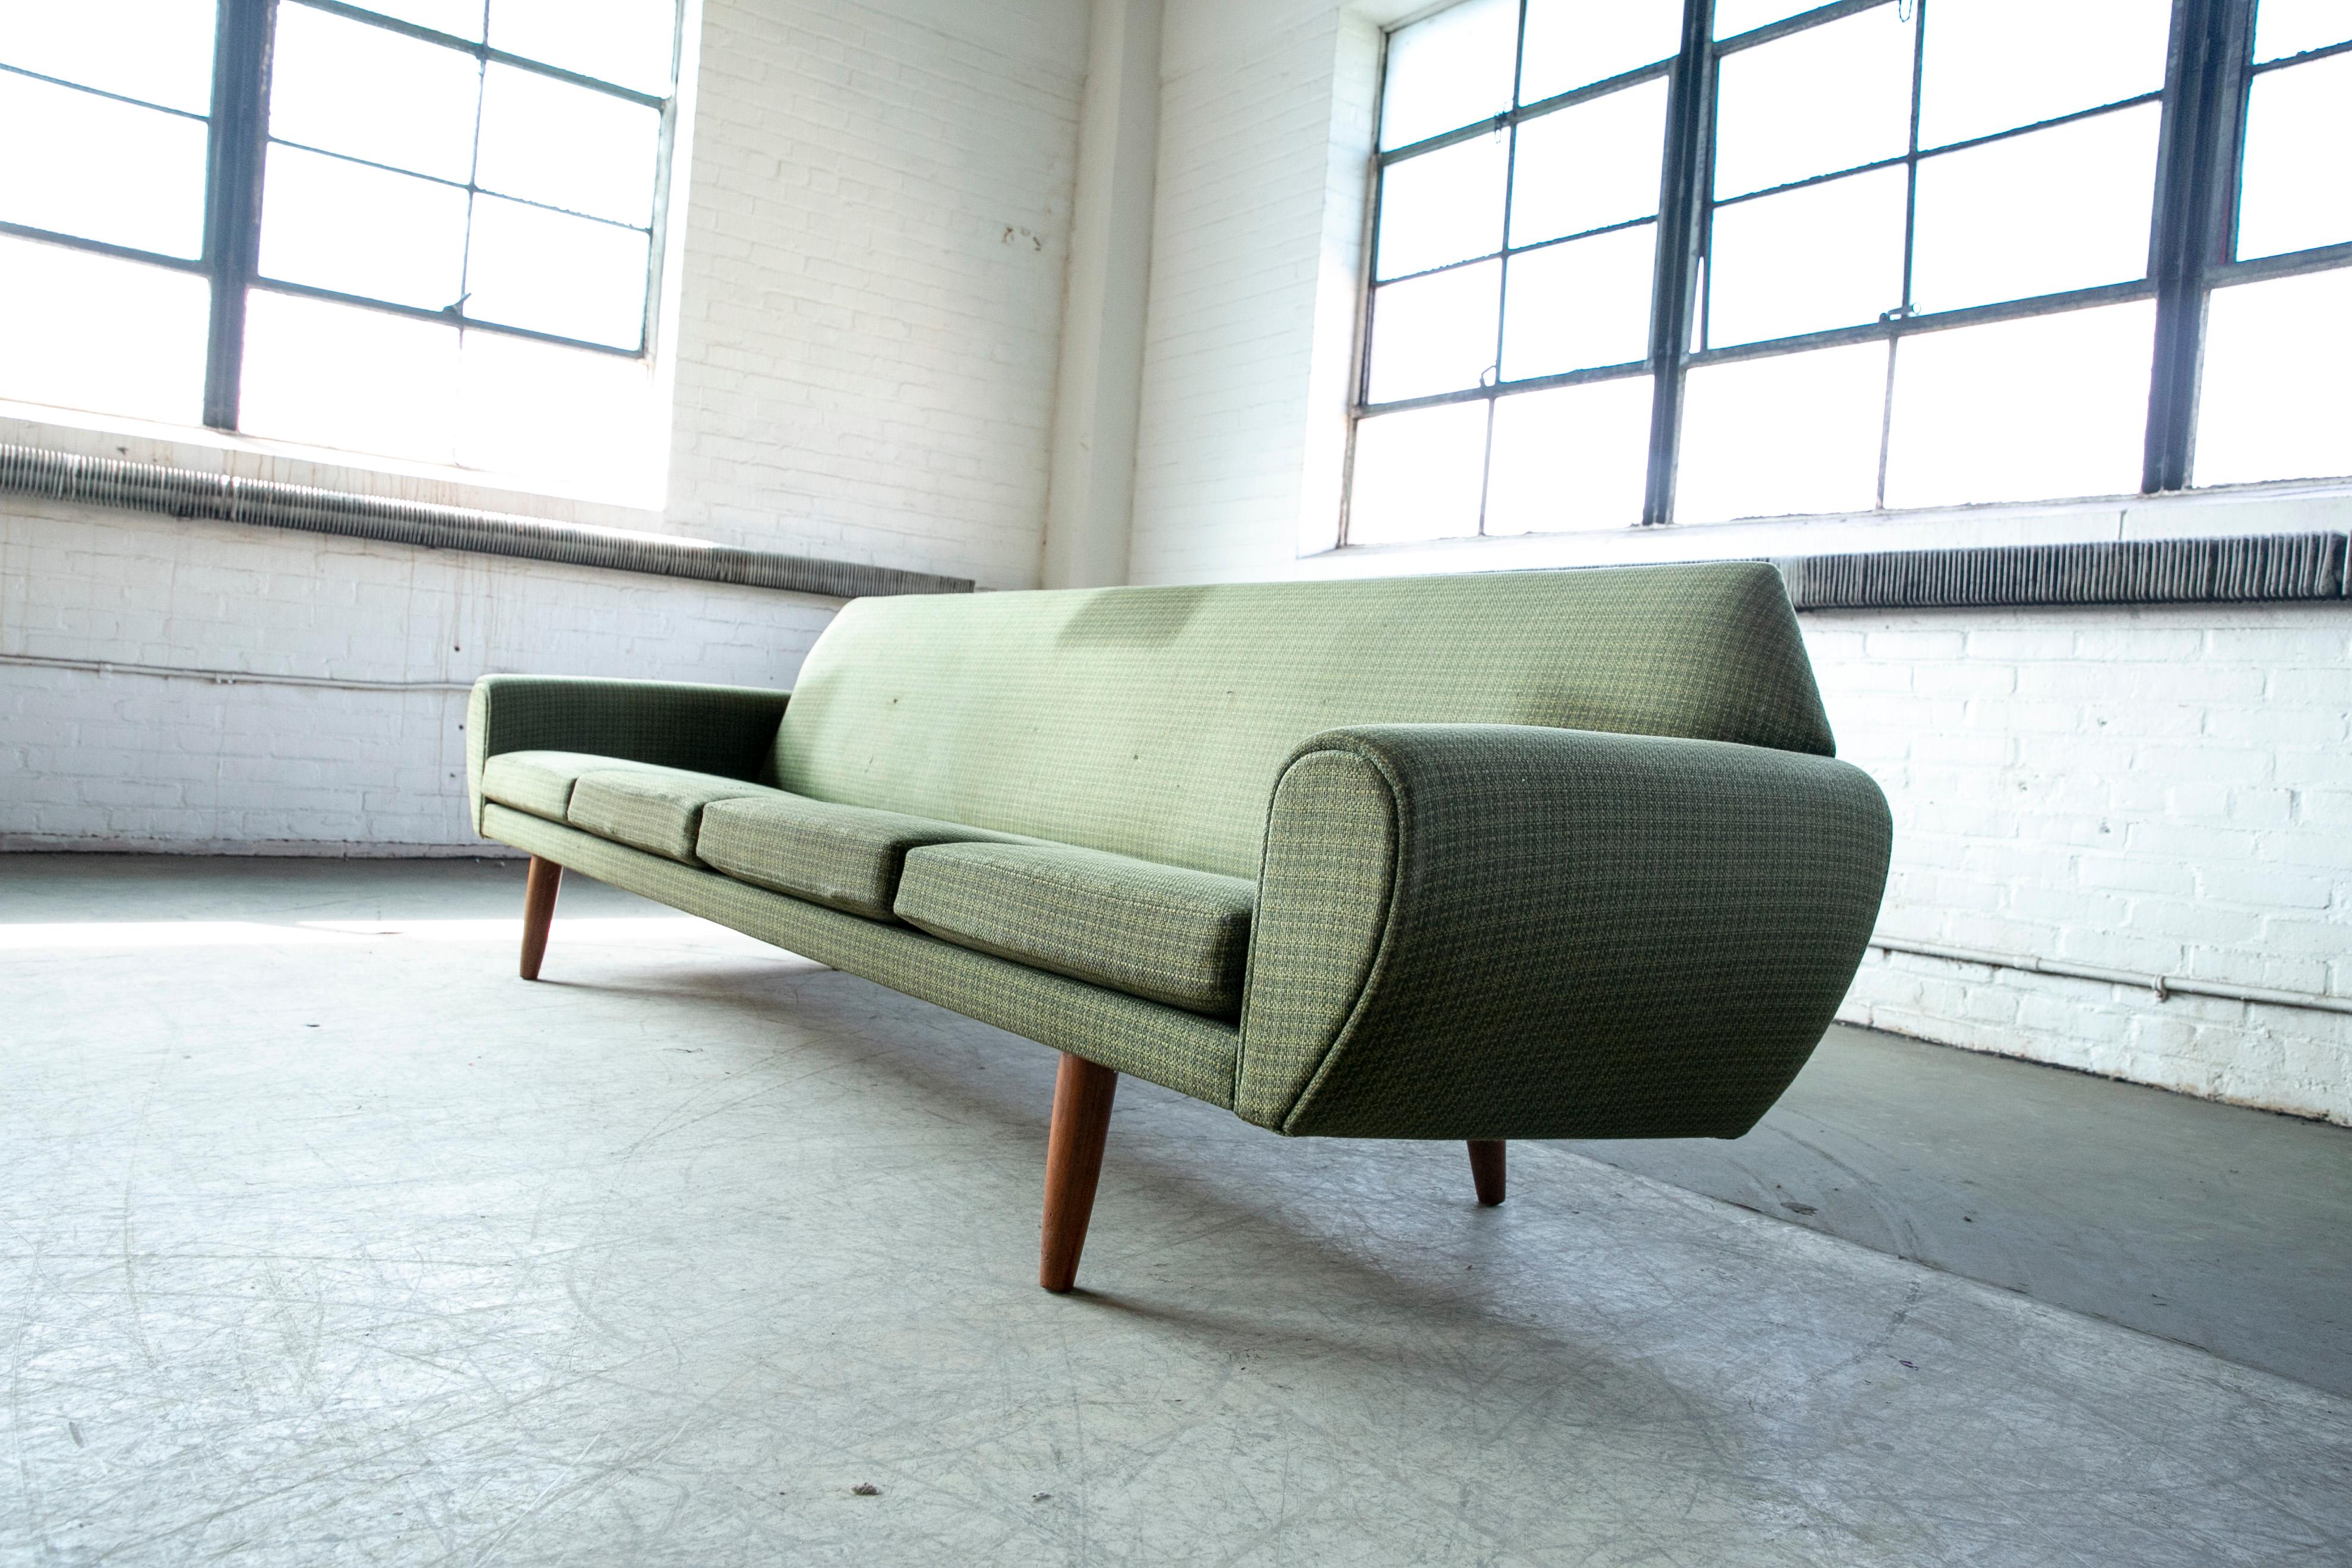 1960's couch